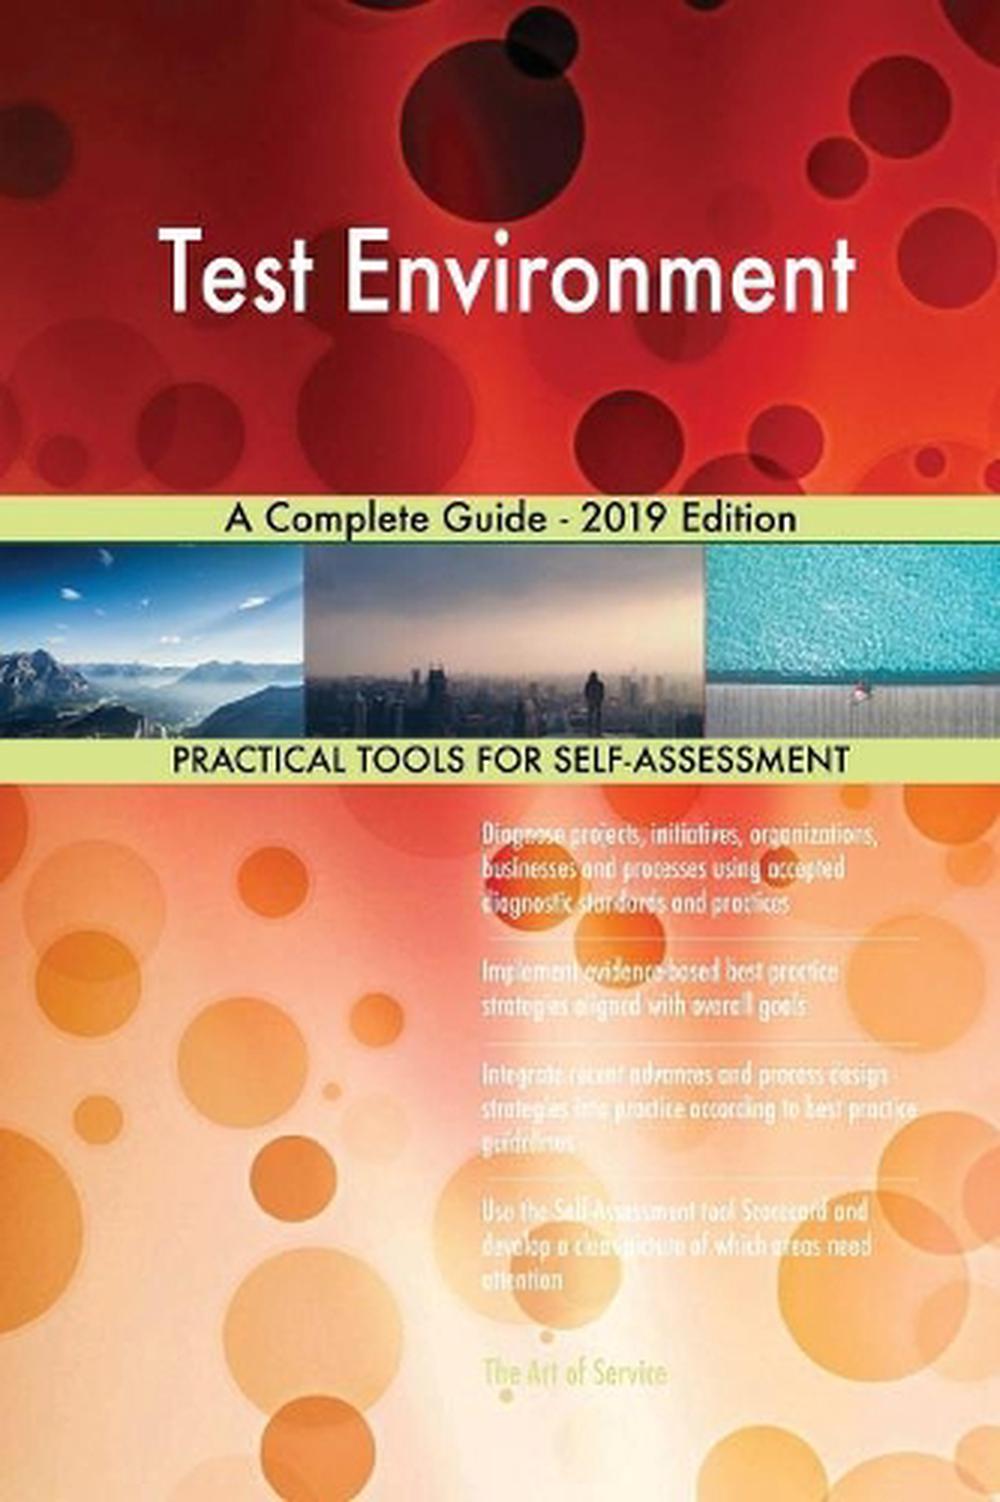 Test Environment A Complete Guide 2019 By Gerardus Blokdyk Paperback